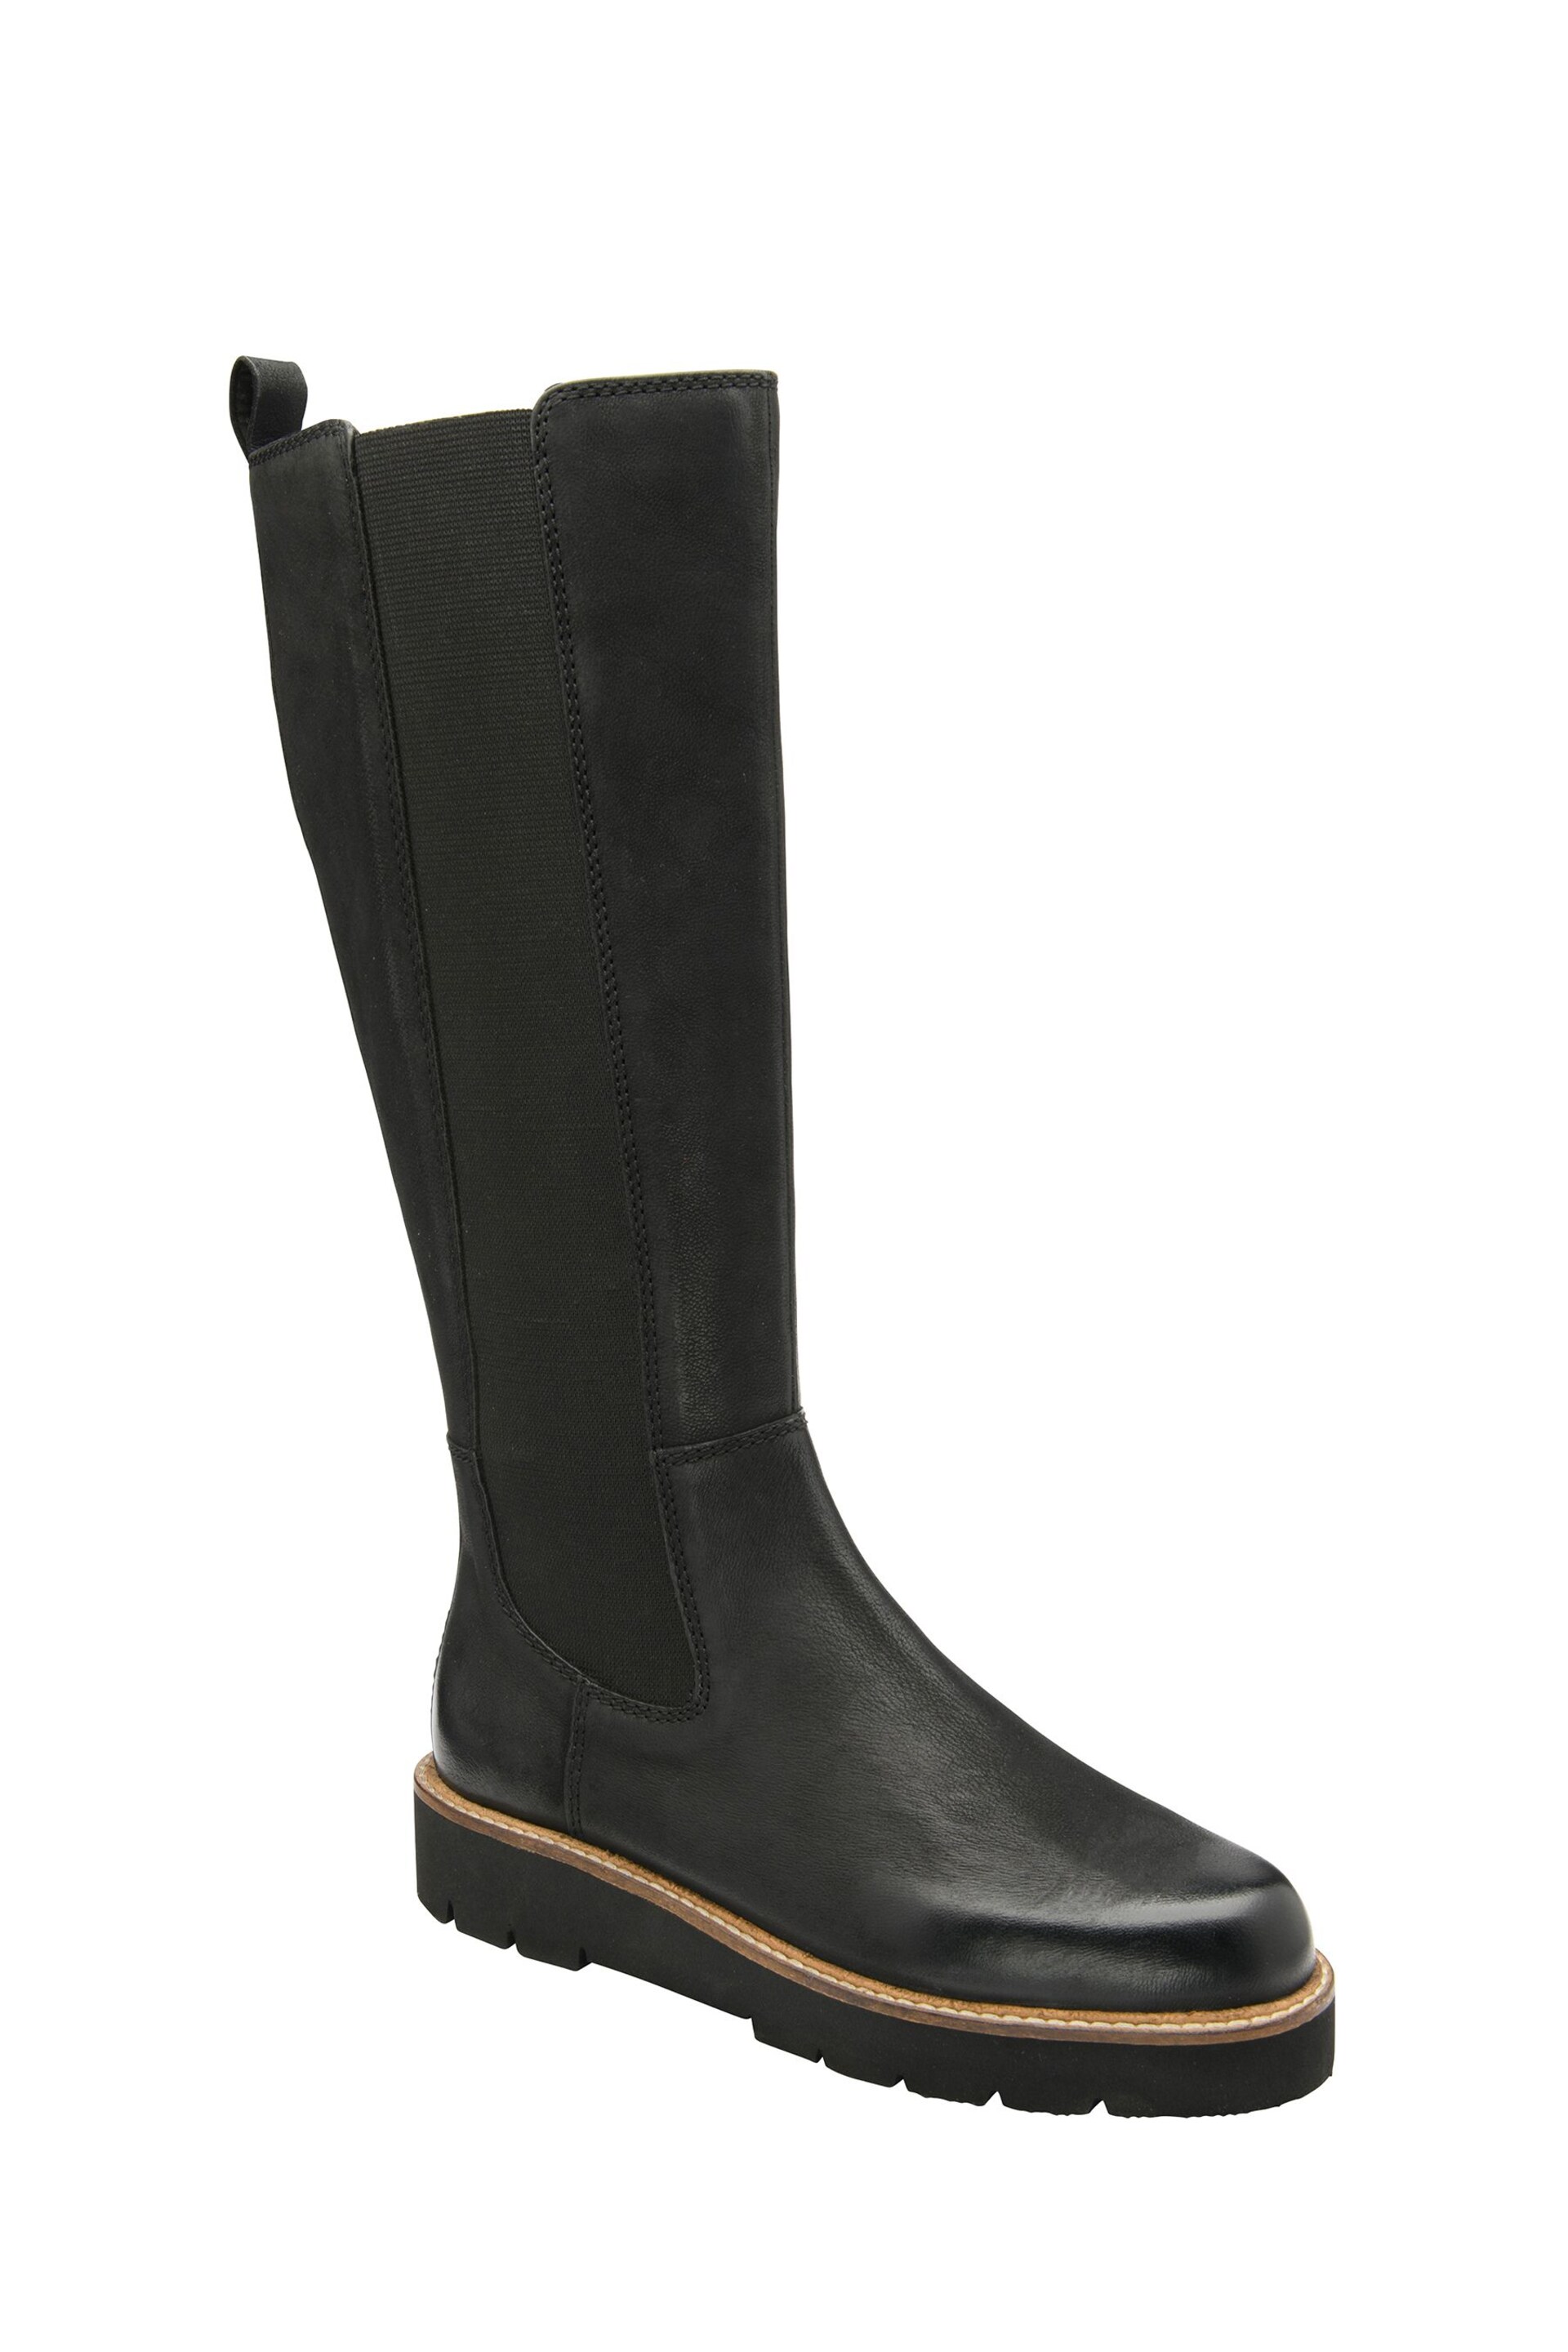 Ravel Black chrome Leather Knee High Chelsea Boots - Image 1 of 4